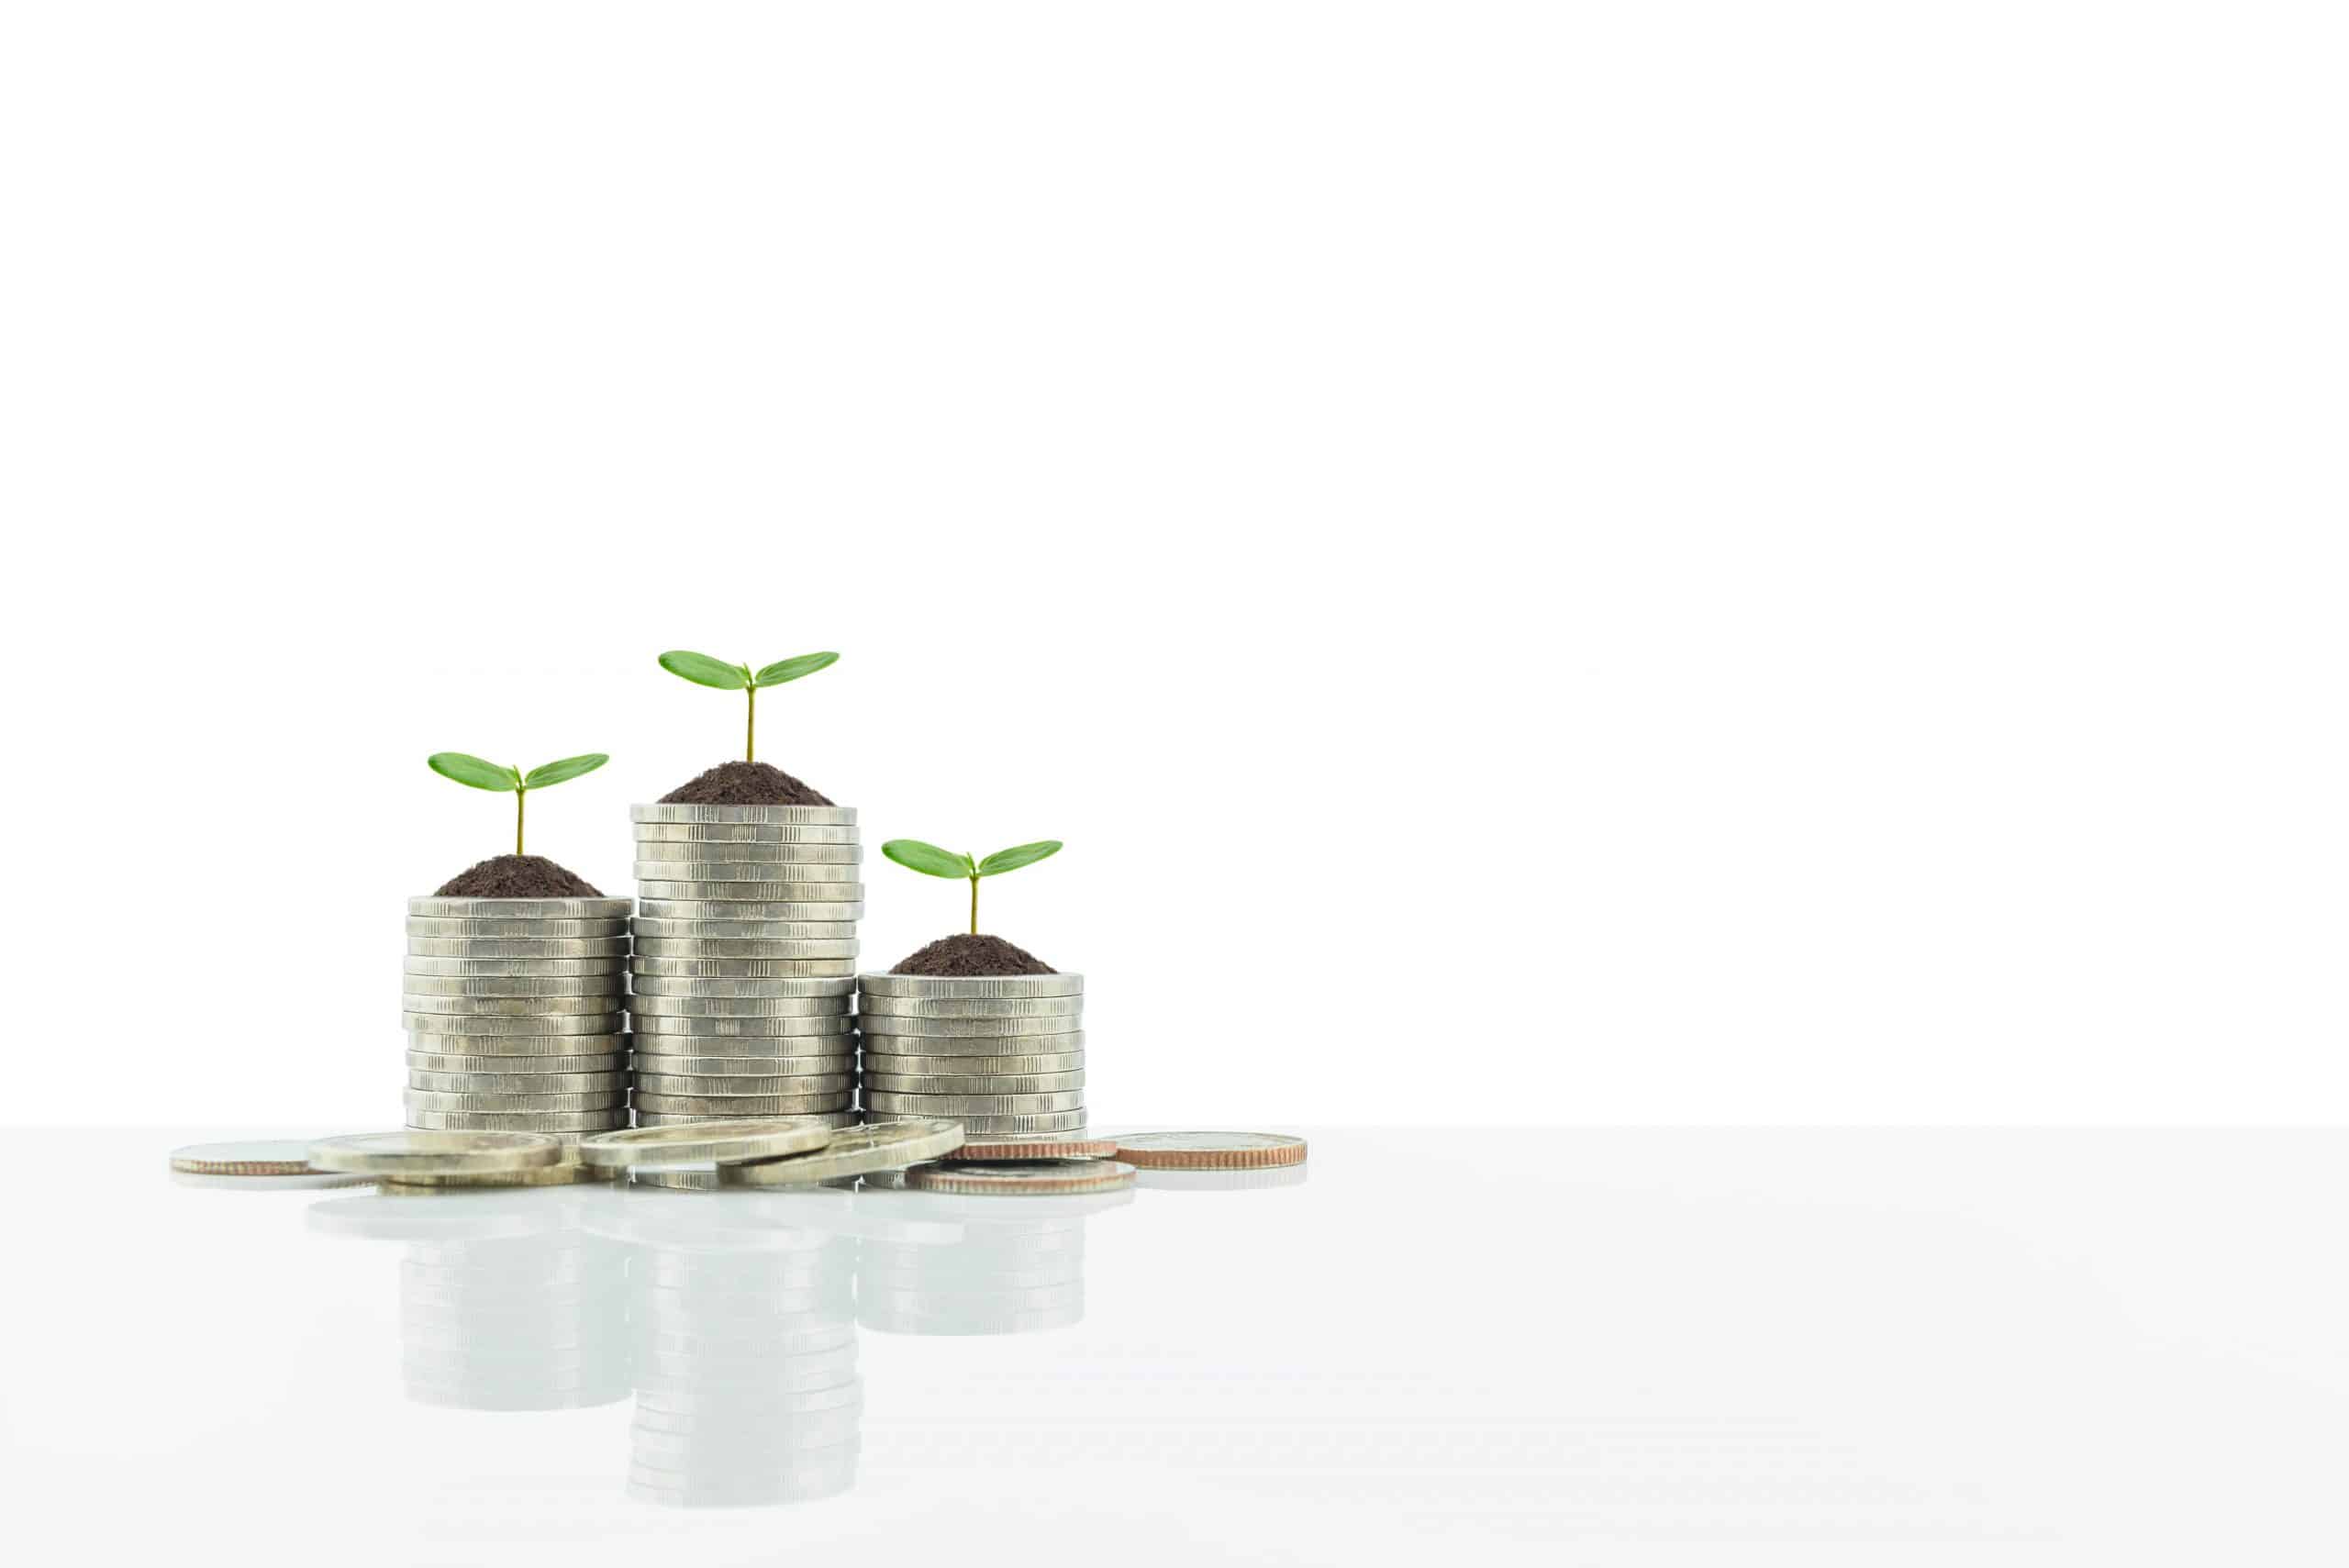 Pictured are three stacks of coins that are depicted as if they are baby plants just sprouting from the ground. Achieving financial freedom begins with planting the seeds of passive income channels and watching them grow. This image is featured on the Passive Income MD blog titled, "Achieving Financial Freedom as a Physician is Simple, but Not Easy."